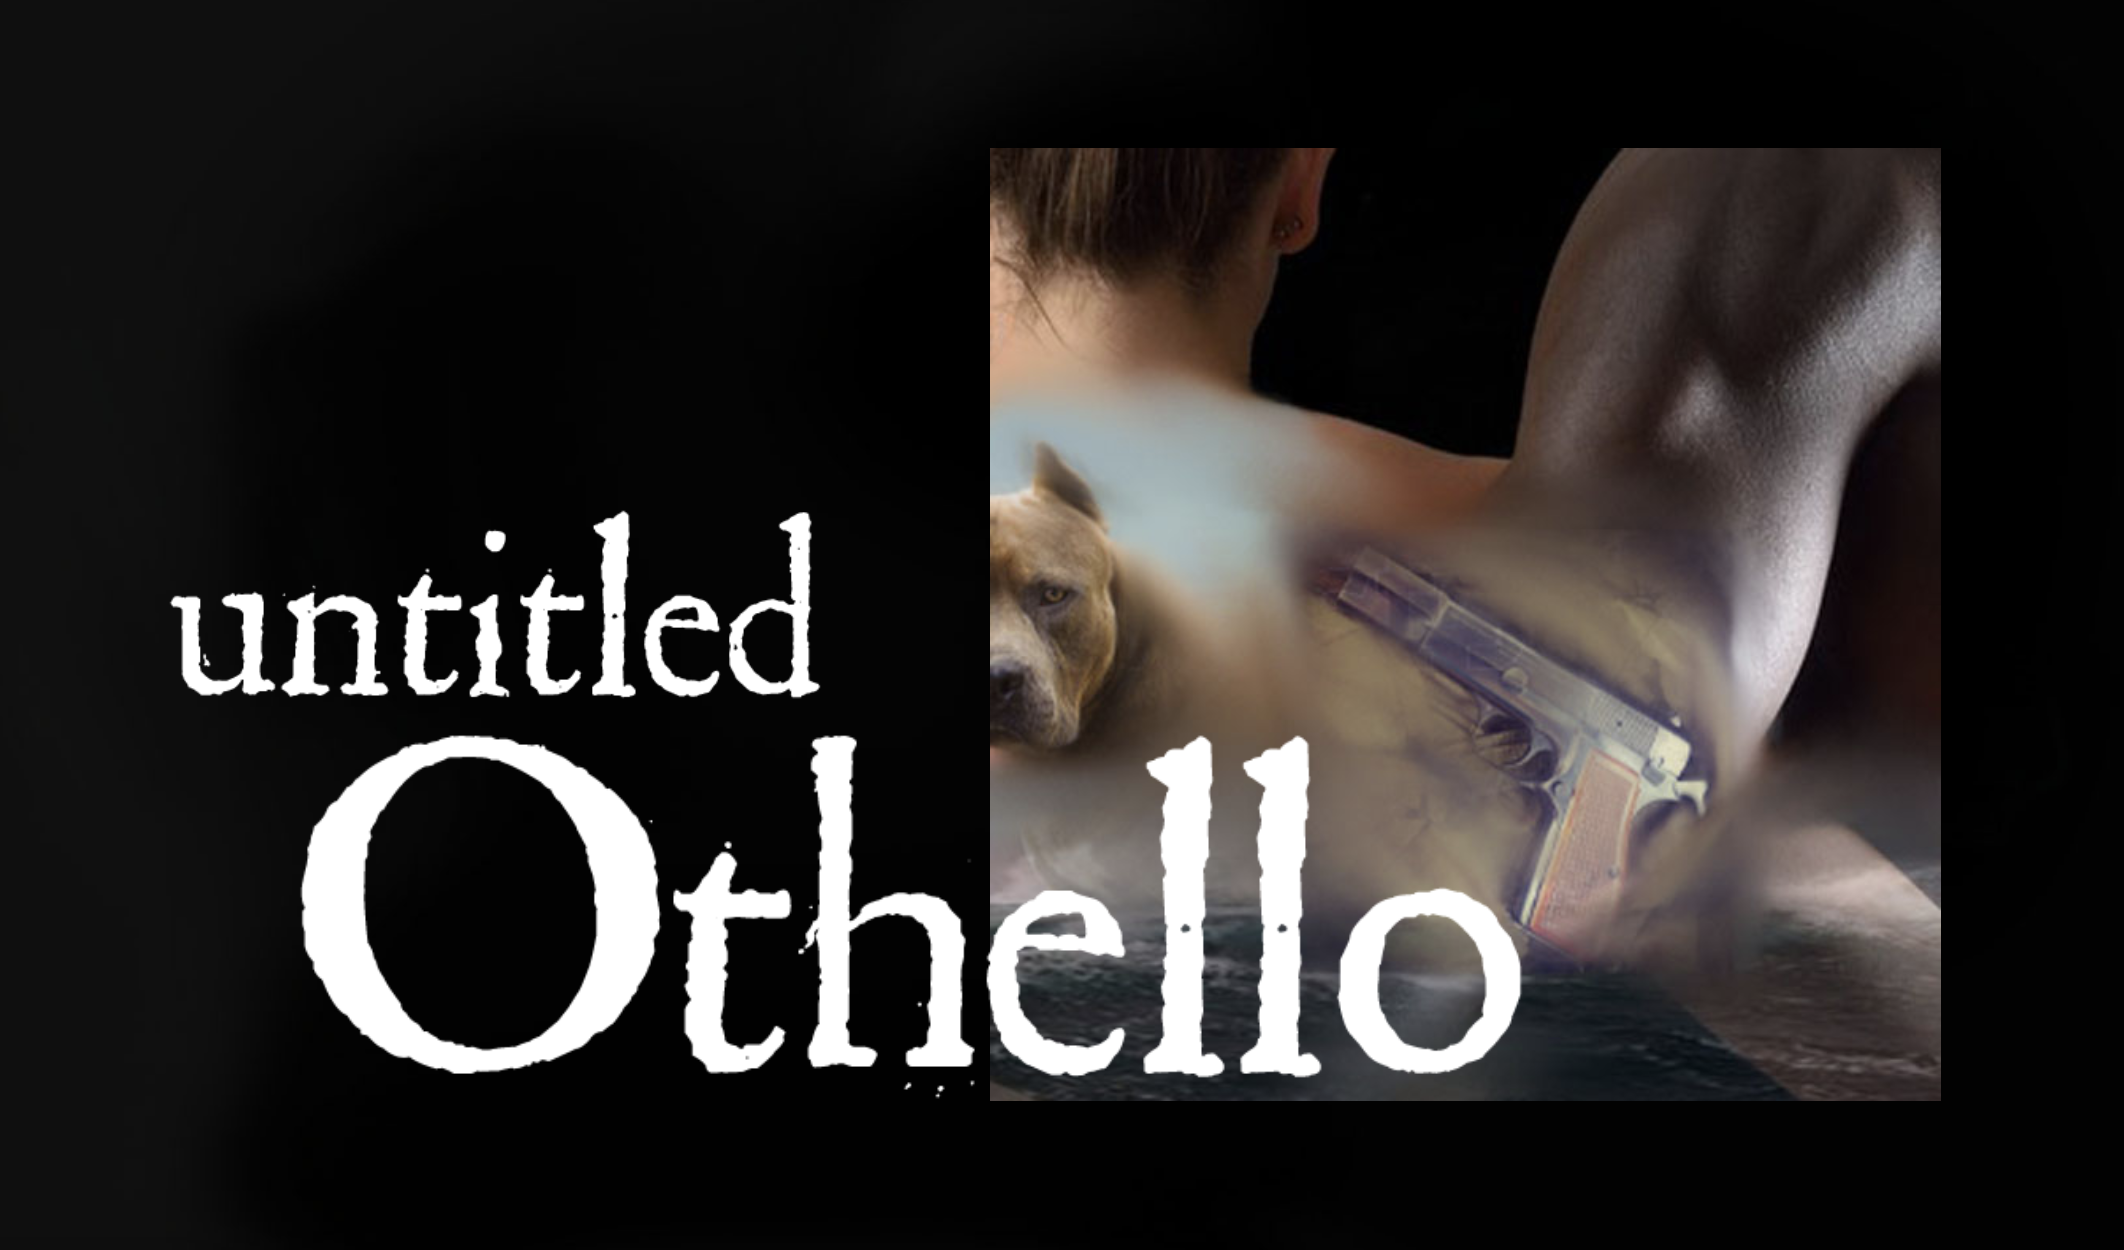 Untitled Othello poster, man and gun